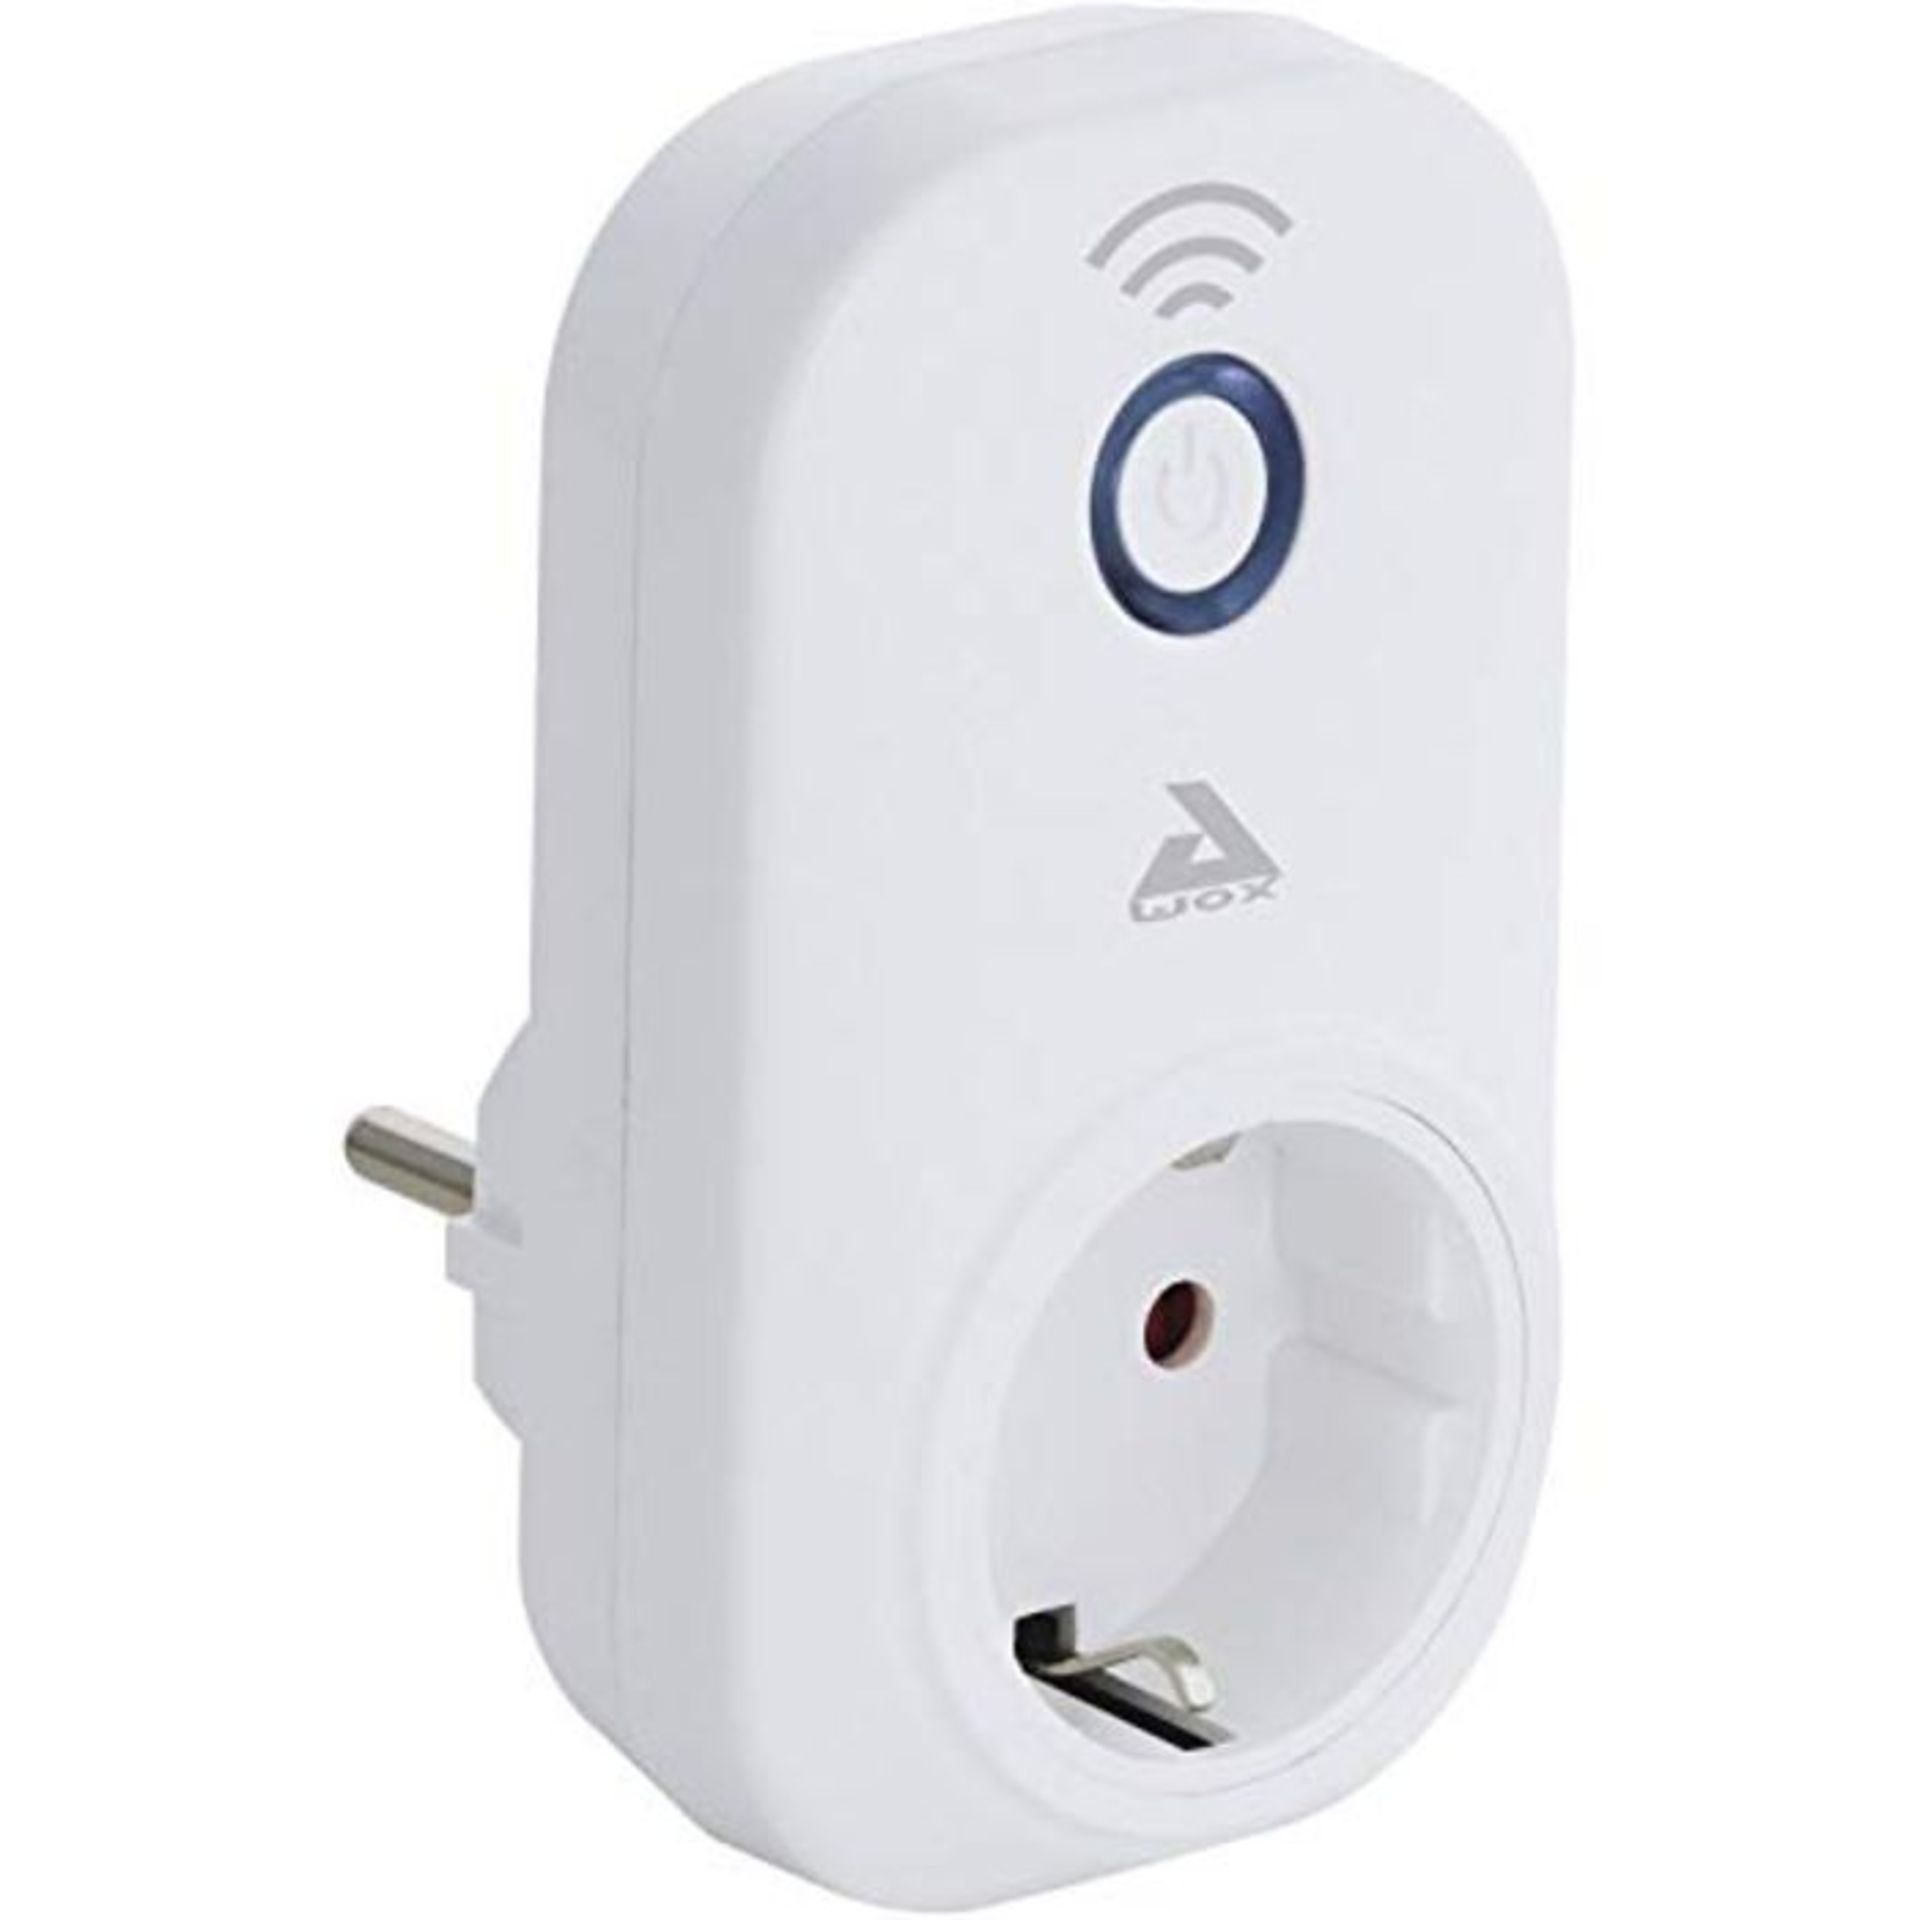 EGLO Connect Plug Plus Smart Home Plug for Voice Control, Socket with WLAN and Energy